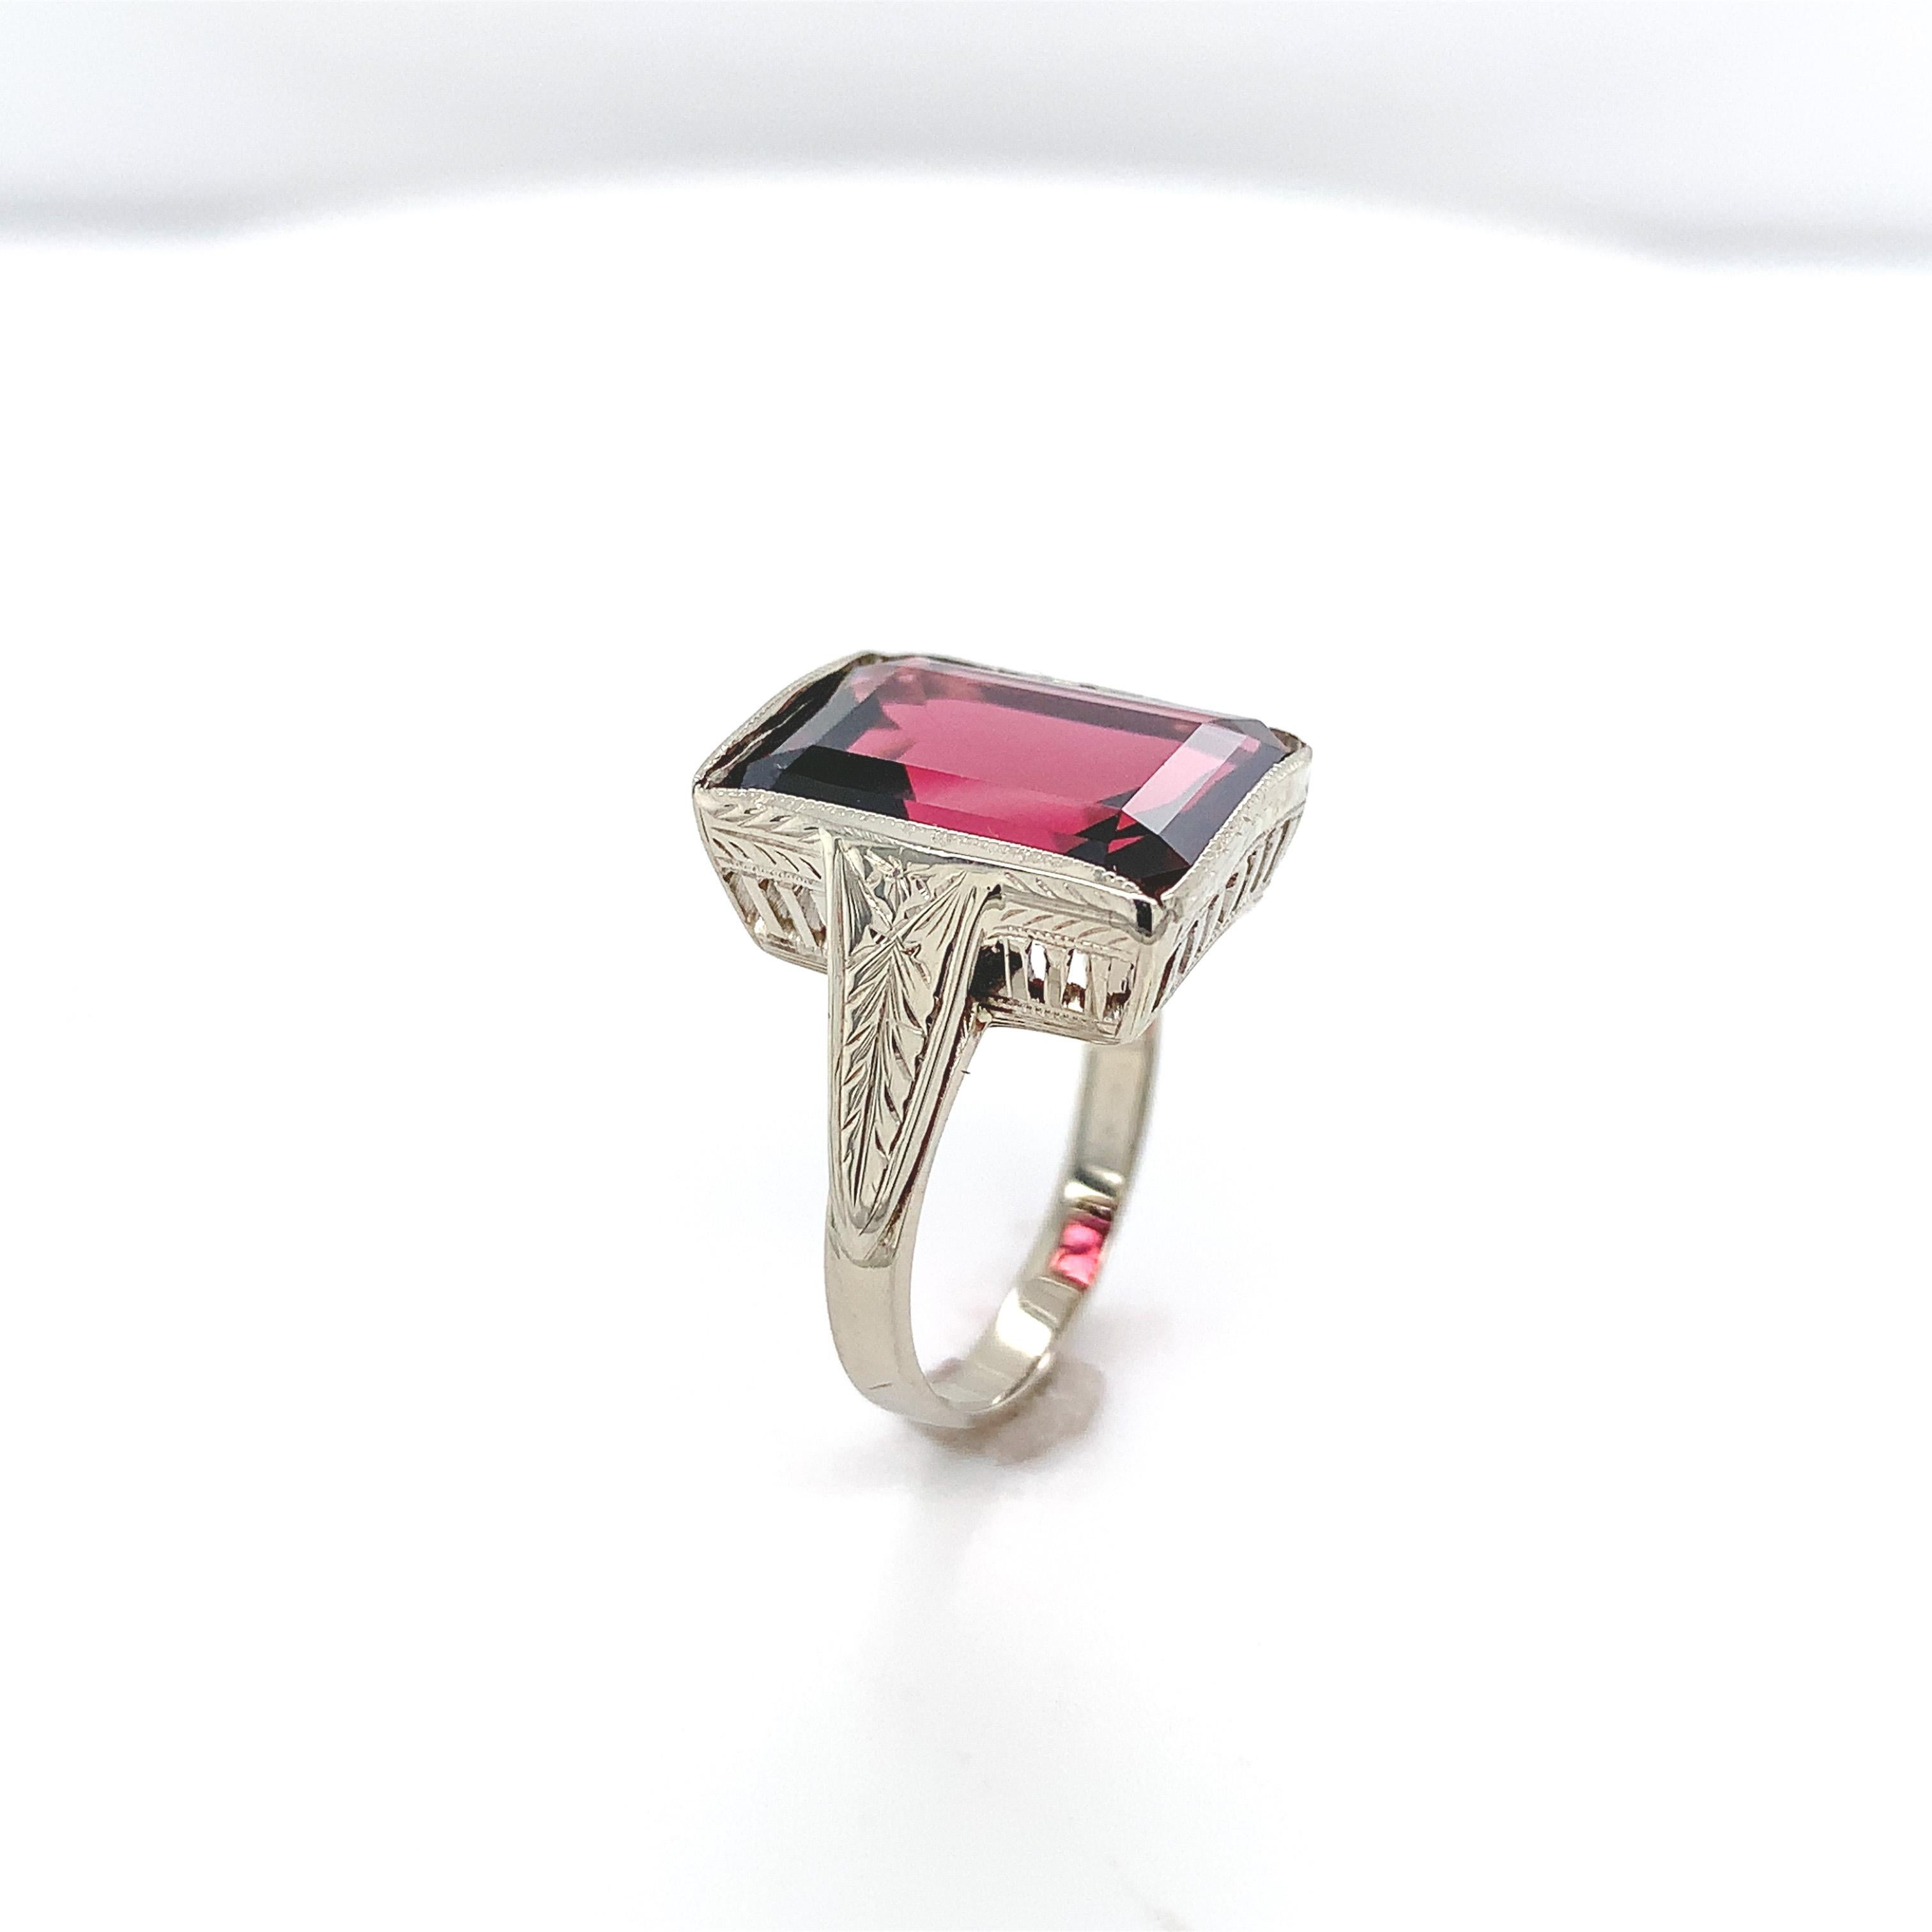 Emerald Cut 14K White Gold Hand Engraved Ring with an 8.35 carat Rhodolite Garnet For Sale